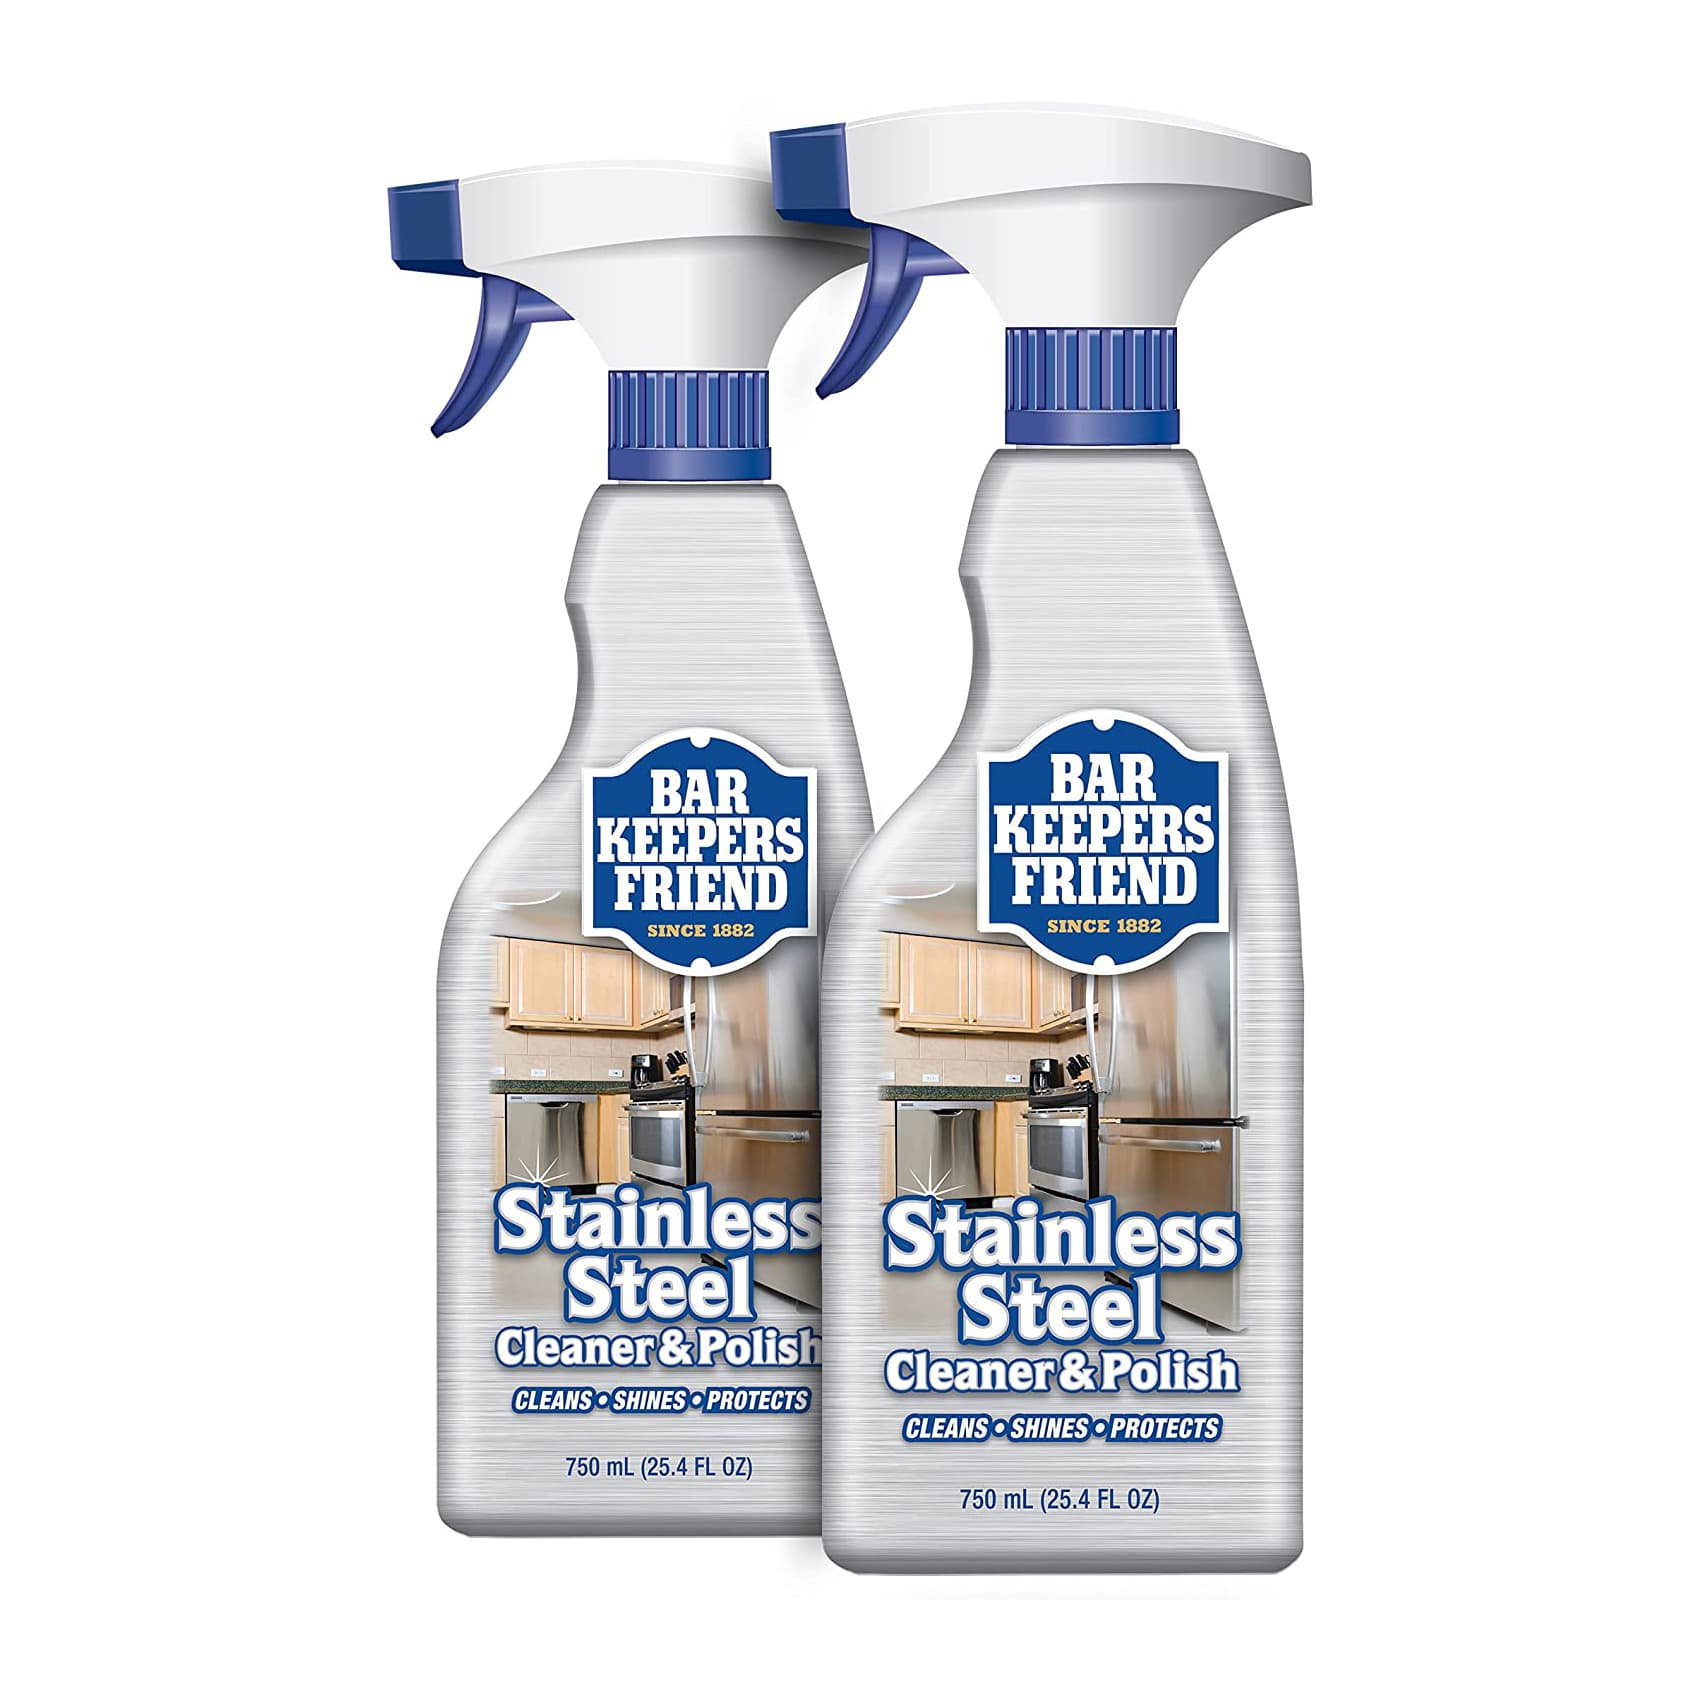 How to Clean Stainless Steel Flatware - Bar Keepers Friend